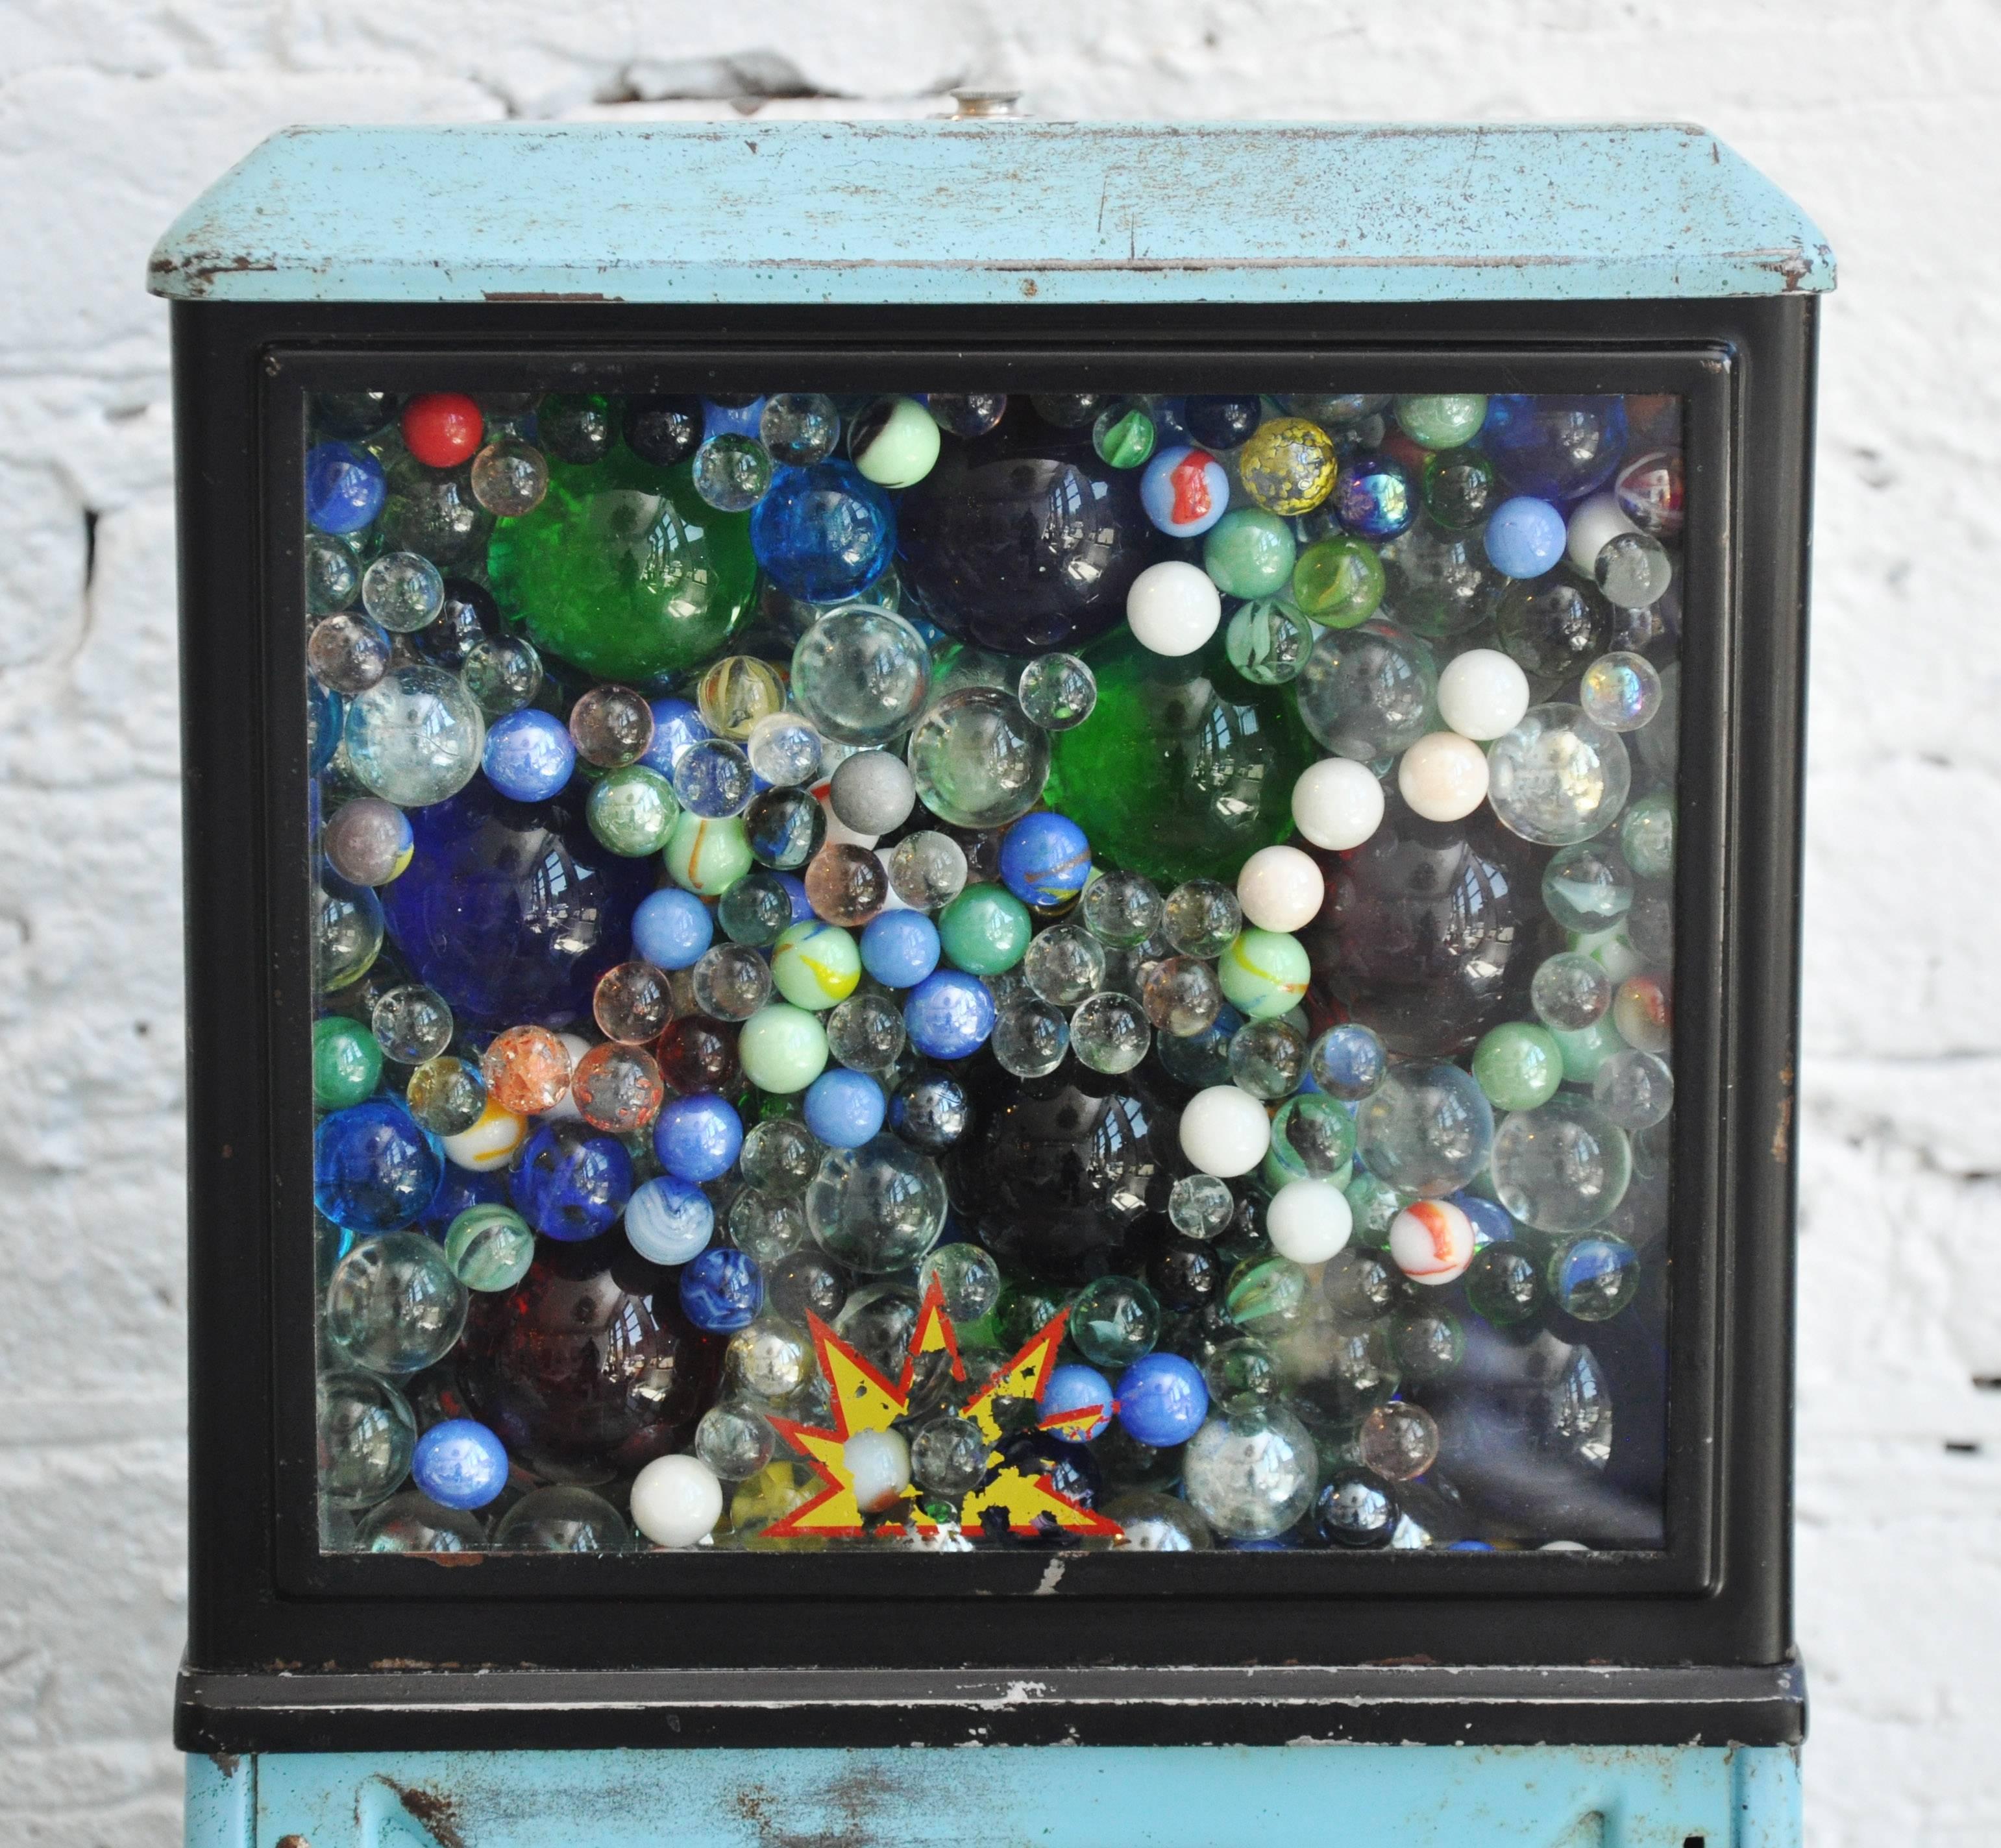 This particularly whimsical piece is made up from a vintage gumboil machine which has been filled with vintage glass marbles.
This piece has a touch lighting element with three different intensities of glow.
Unbelievable colors and when